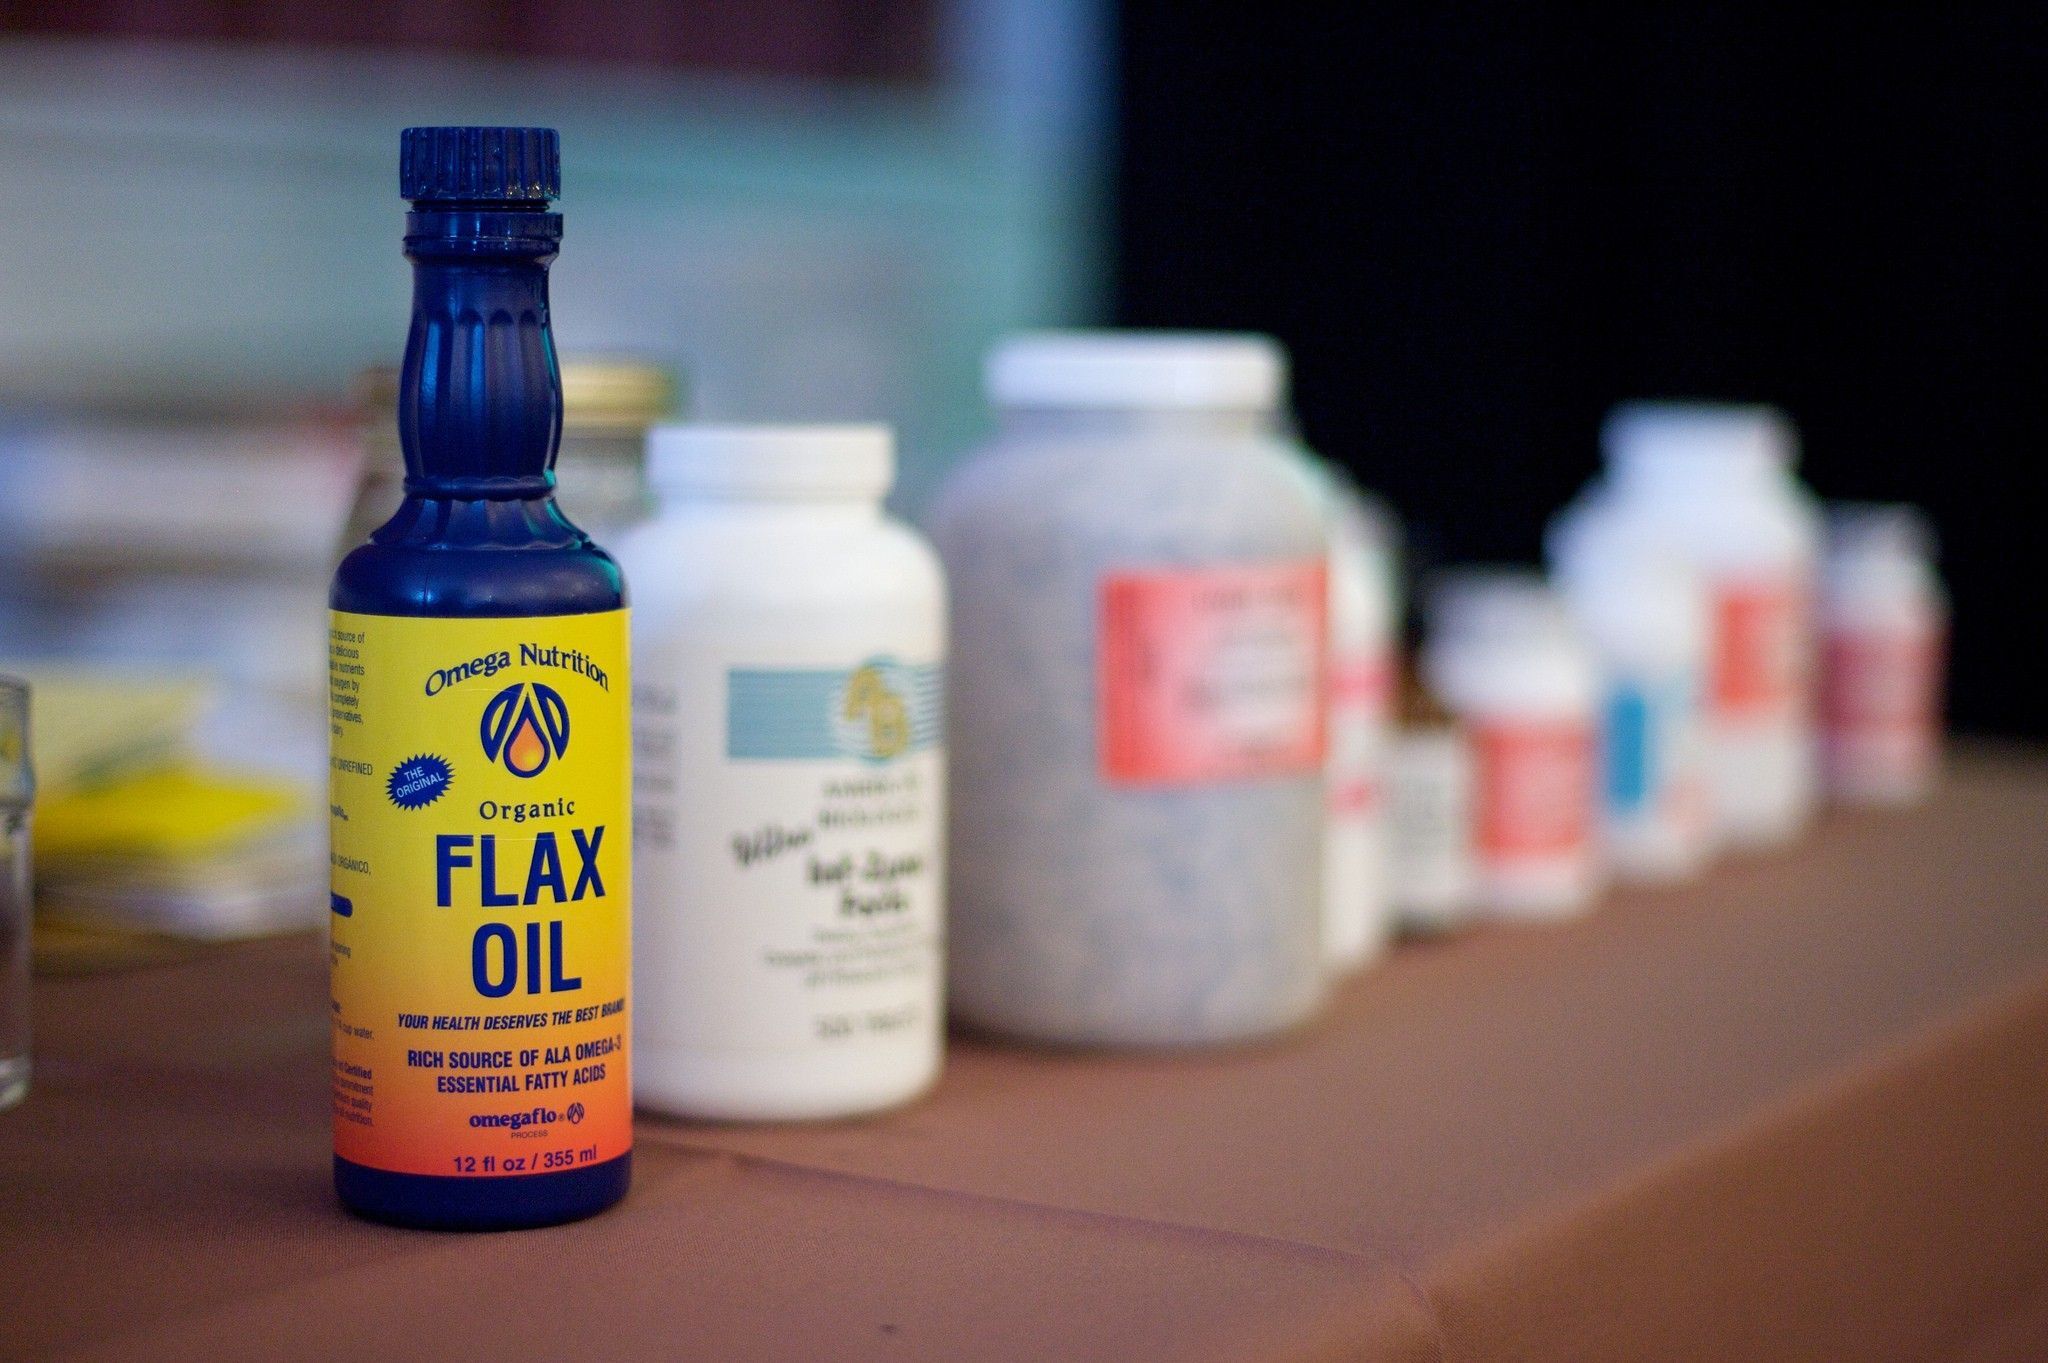 Bottle of flax oil alongside other supplements